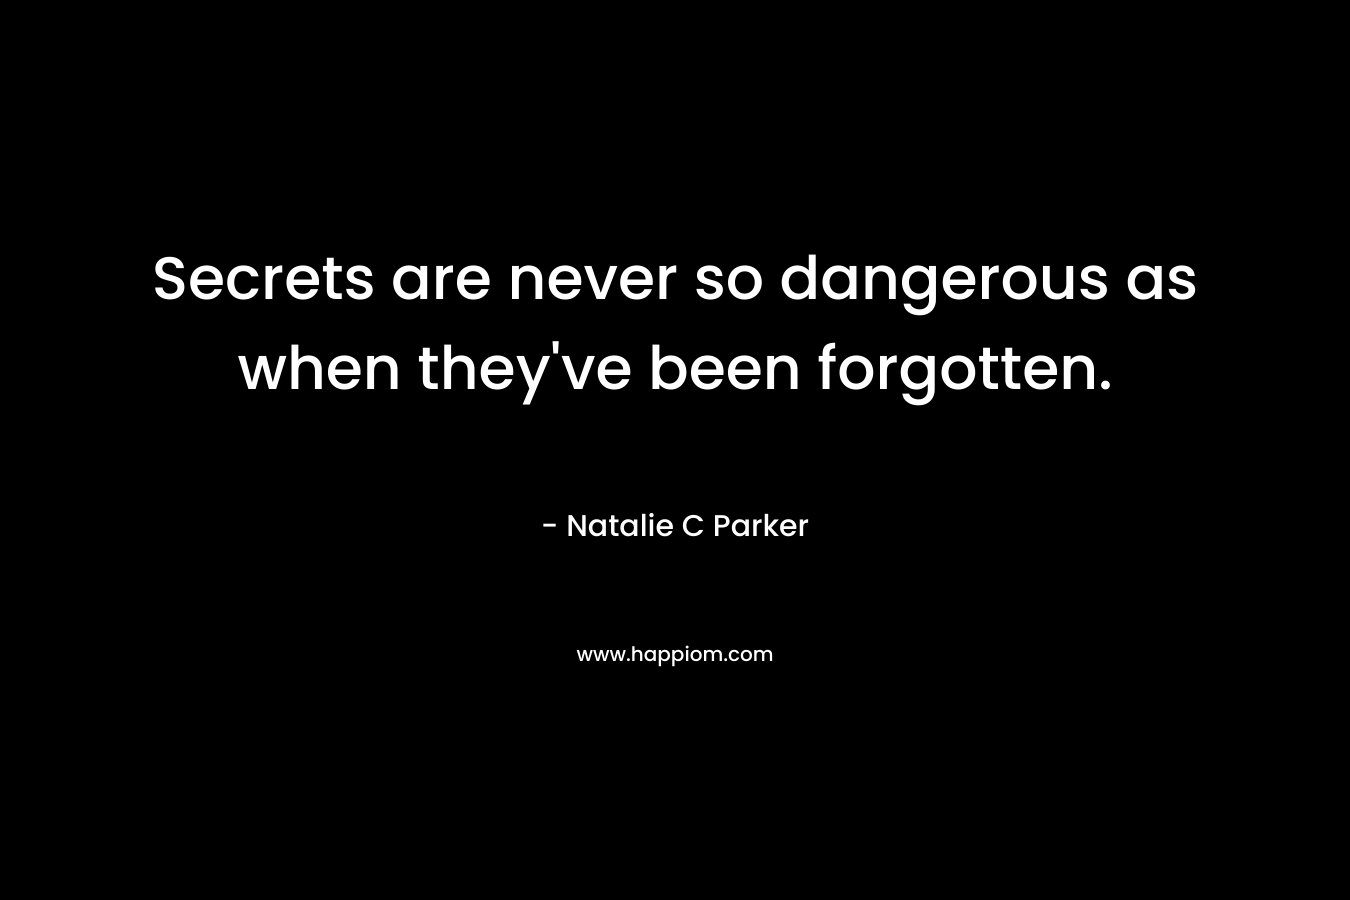 Secrets are never so dangerous as when they’ve been forgotten. – Natalie C Parker